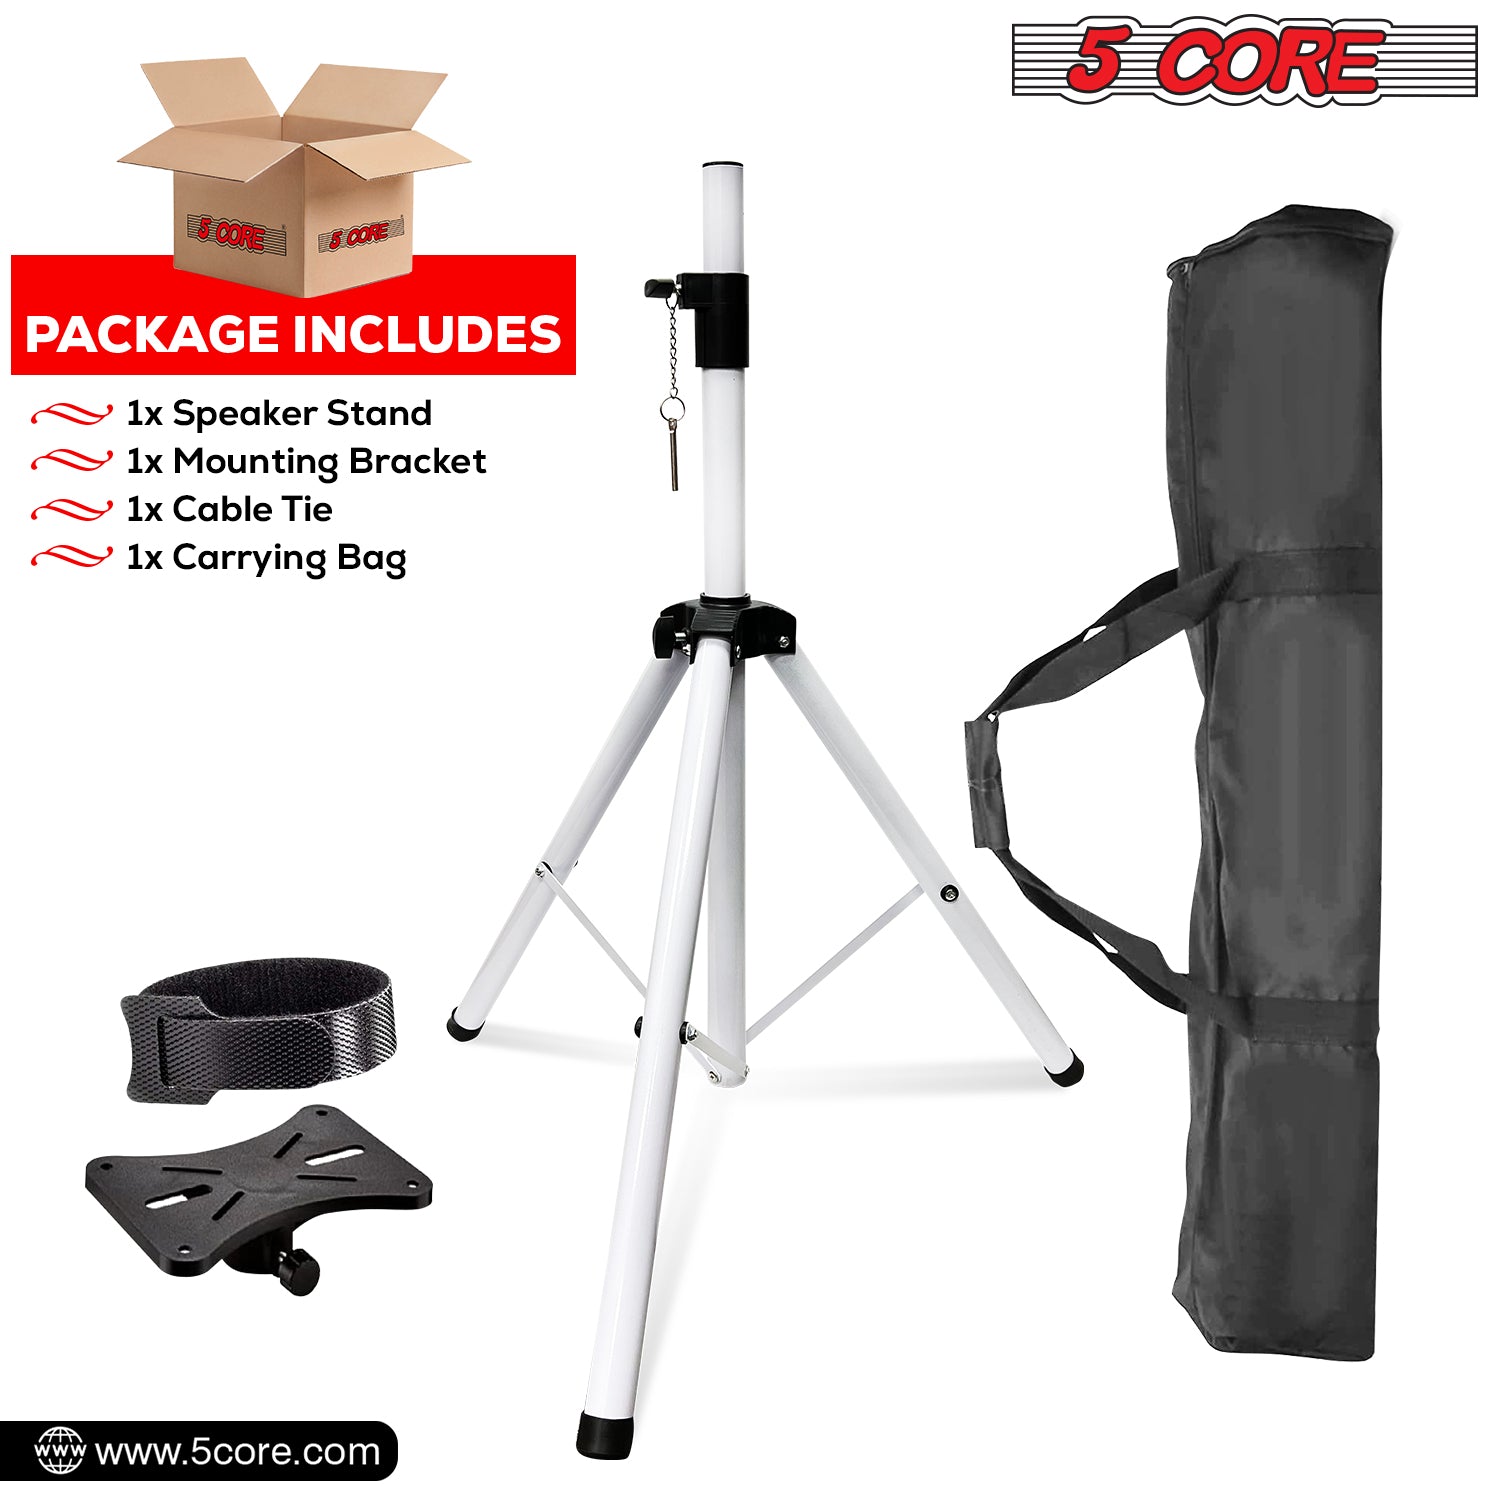 Package includes stand, cable ties, bracket, carry bag